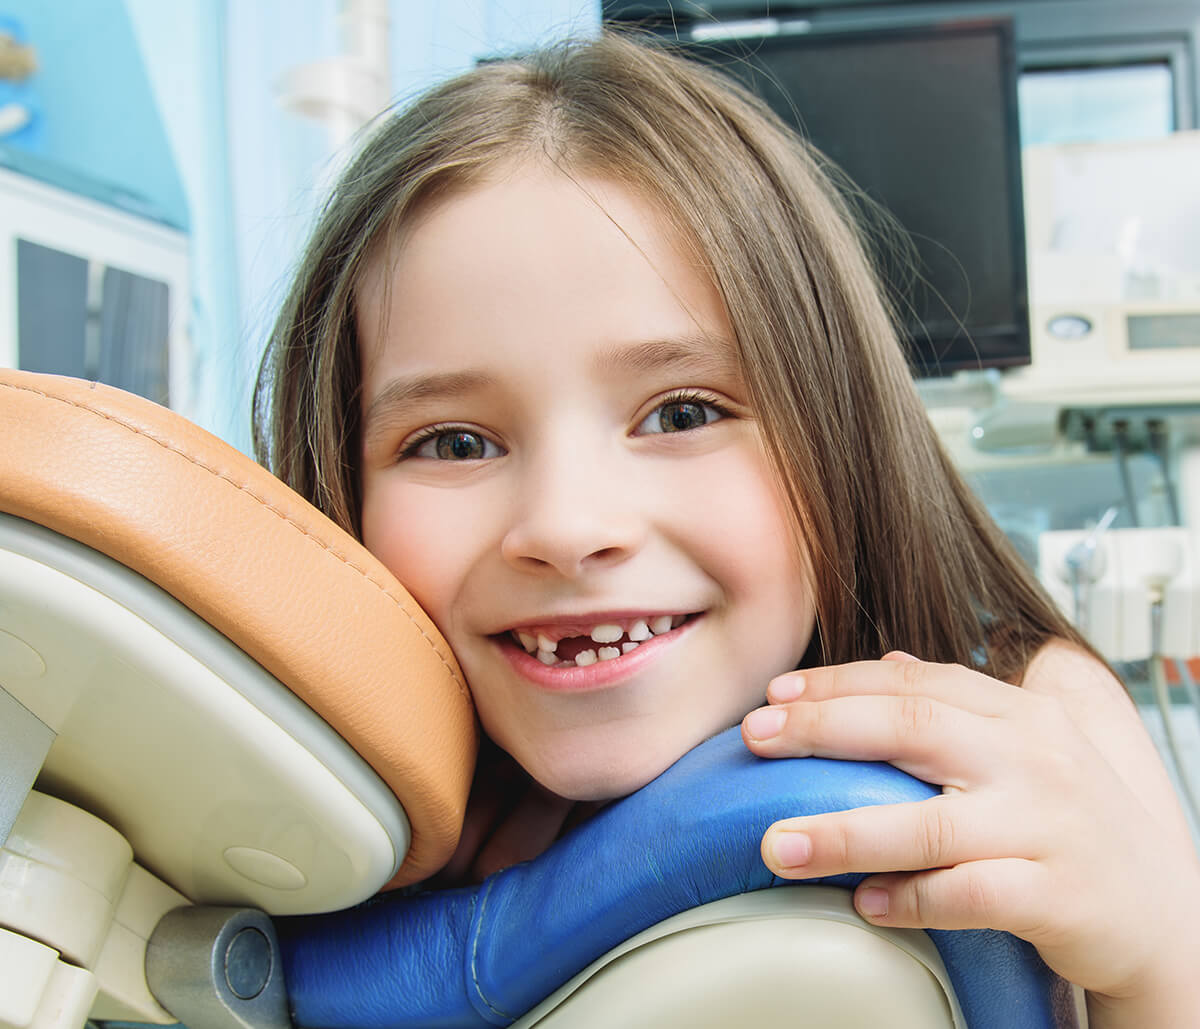 Medicaid dentist in Fort Worth, TX answers your FAQs: What pediatric dental care does my child need?